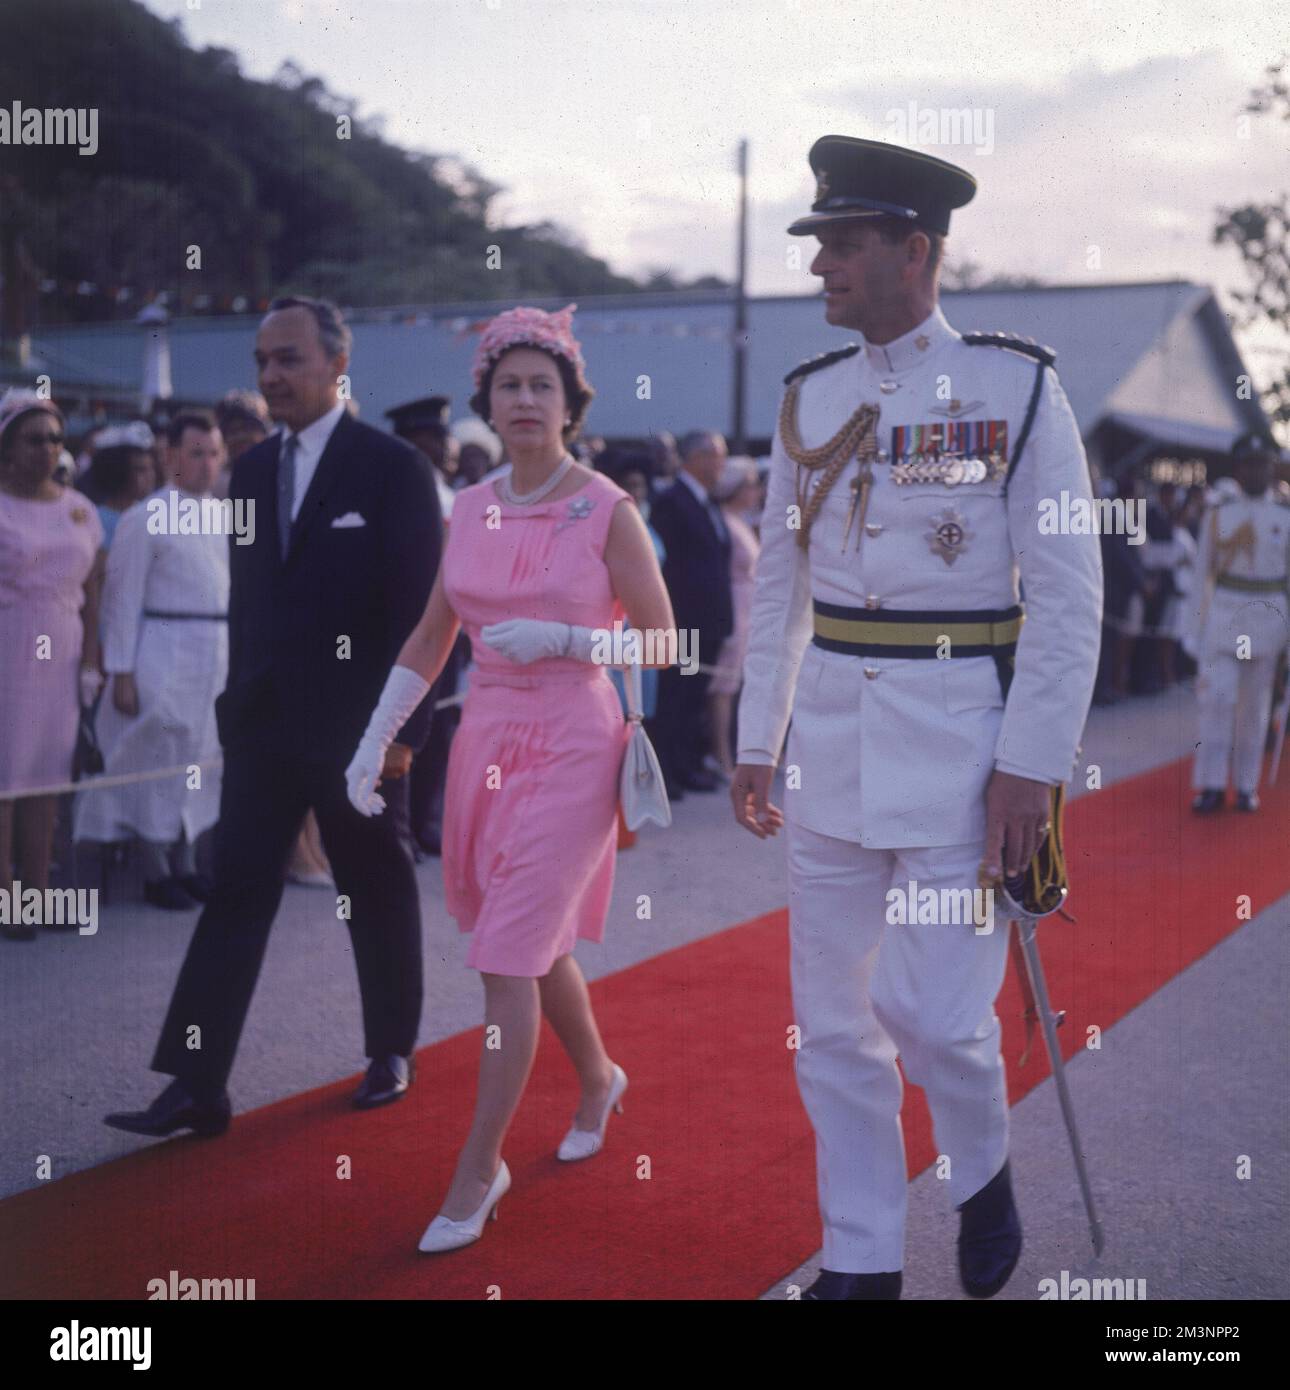 Queen Elizabeth II, wearing a striking pink outfit, pictured on her West Indies tour of 1966 accompanied by Prince Philip in a dashing white dress uniform on the red carpet.     Date: 1966 Stock Photo